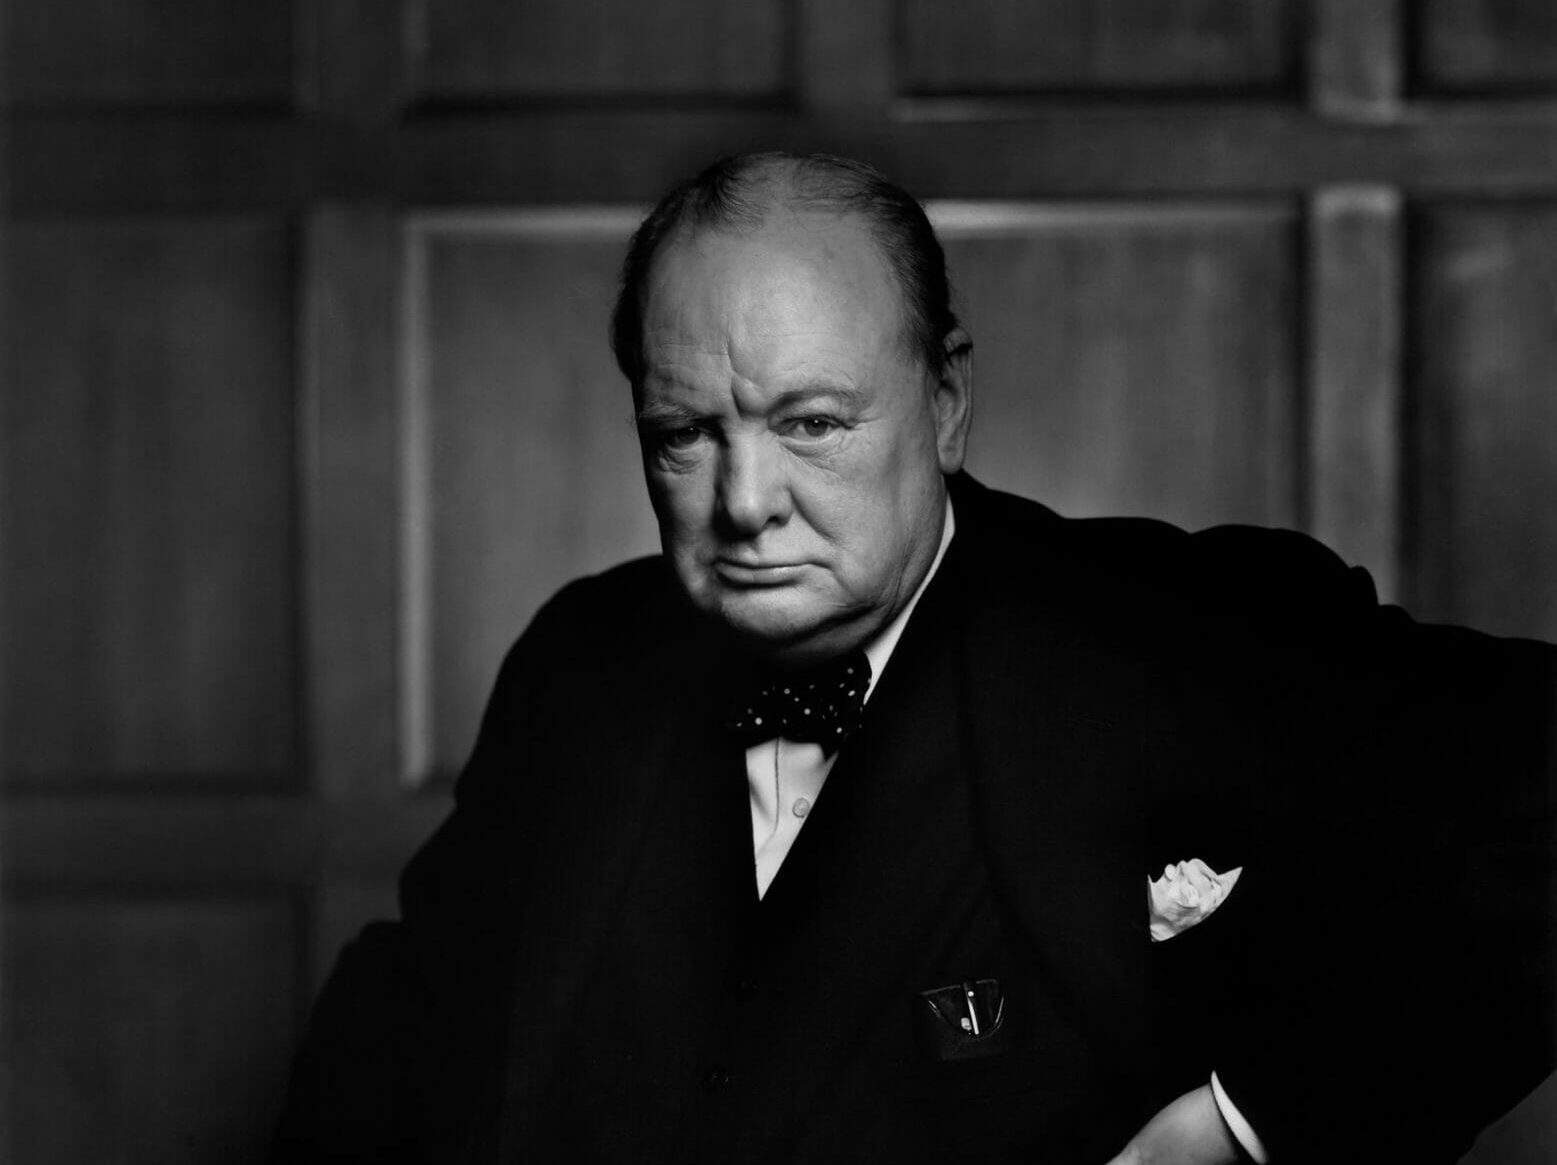 Winston Churchill wearing his signature polka dot bow tie in an iconic photograph by Yousuf Karsh